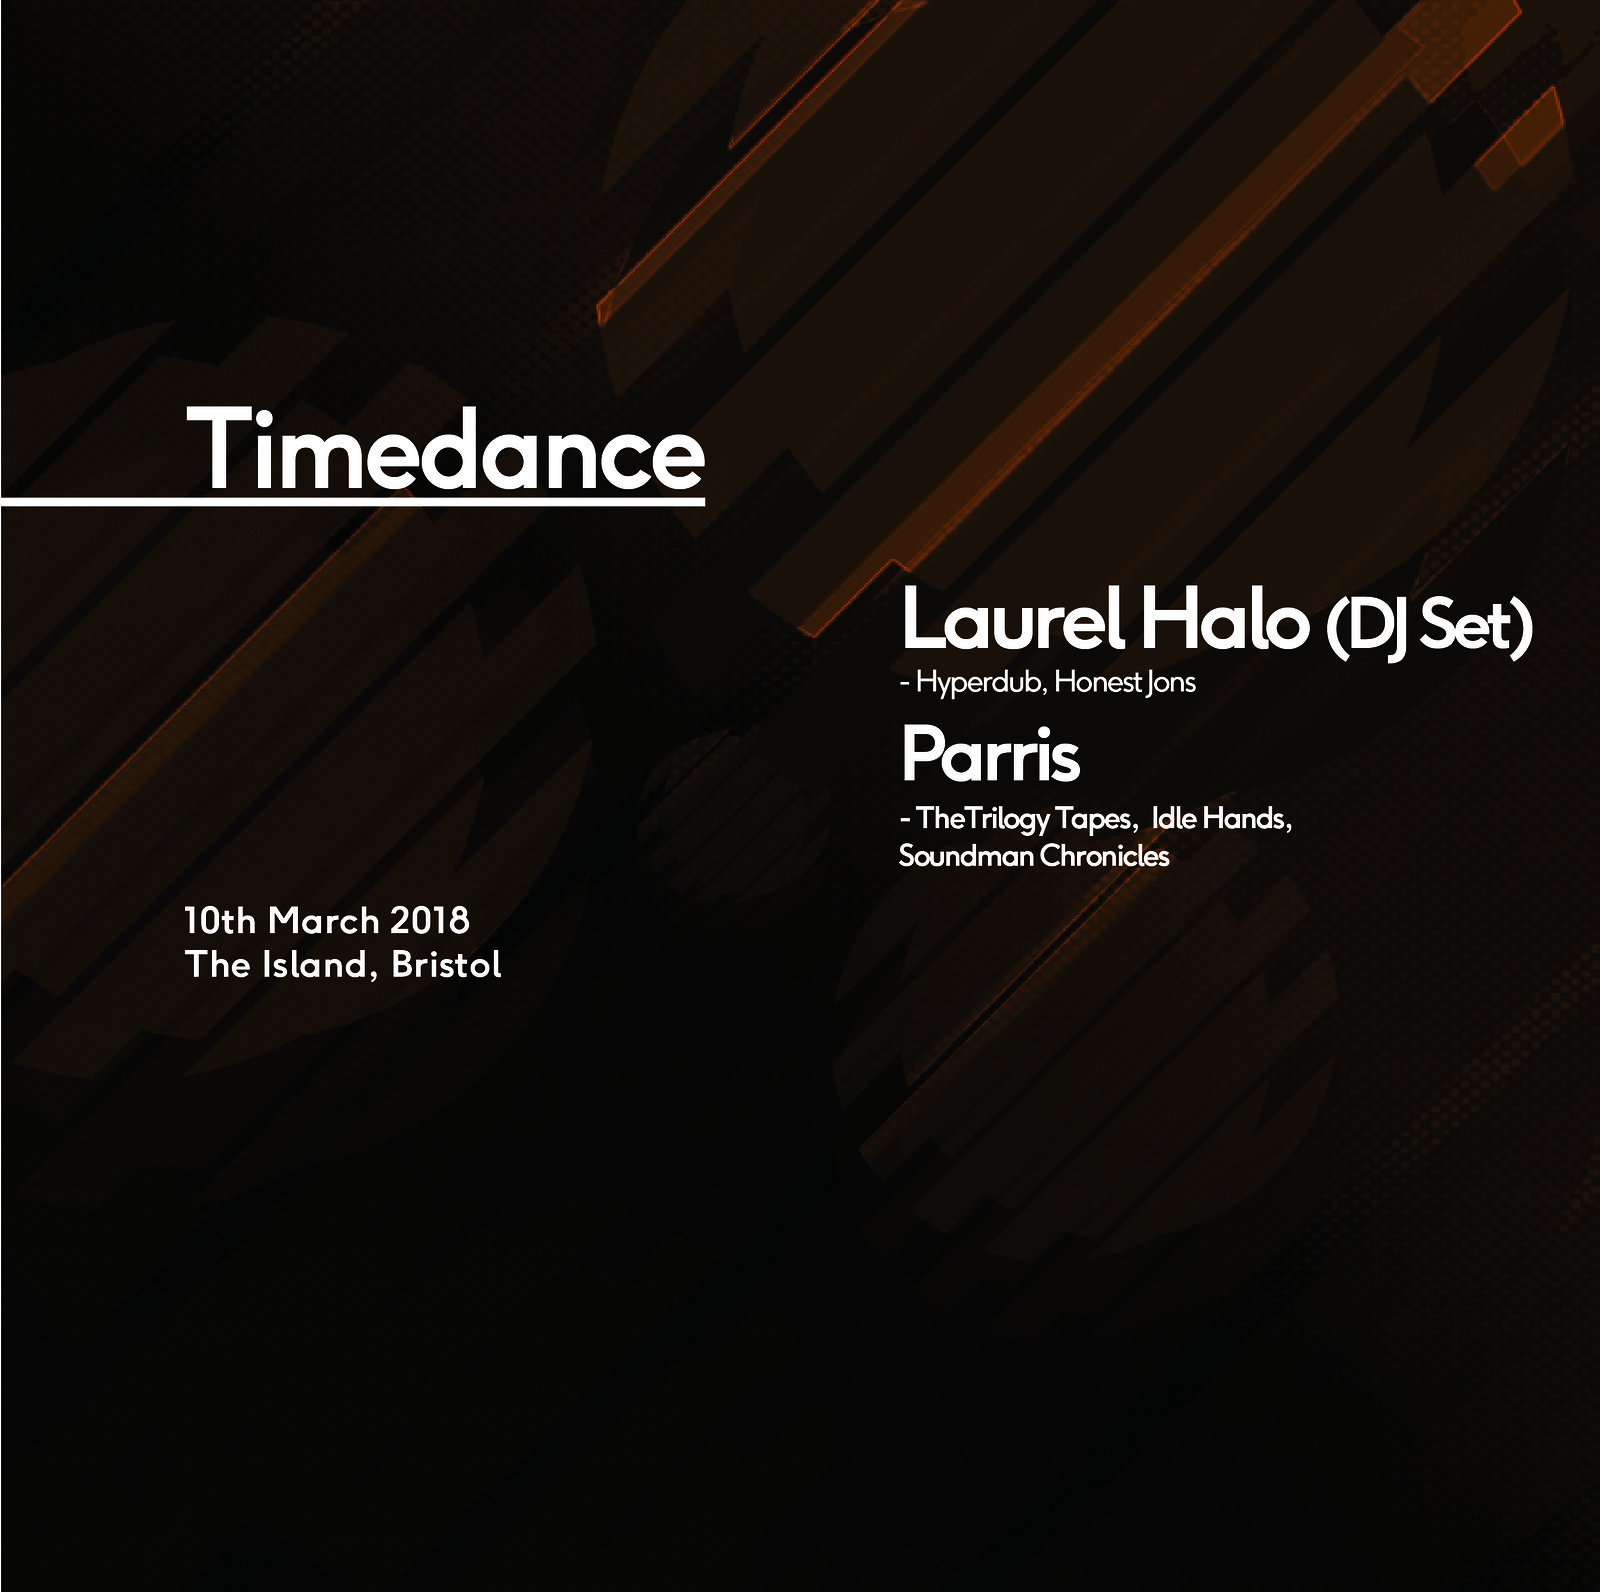 Timedance - Laurel Halo , Parris at The Island